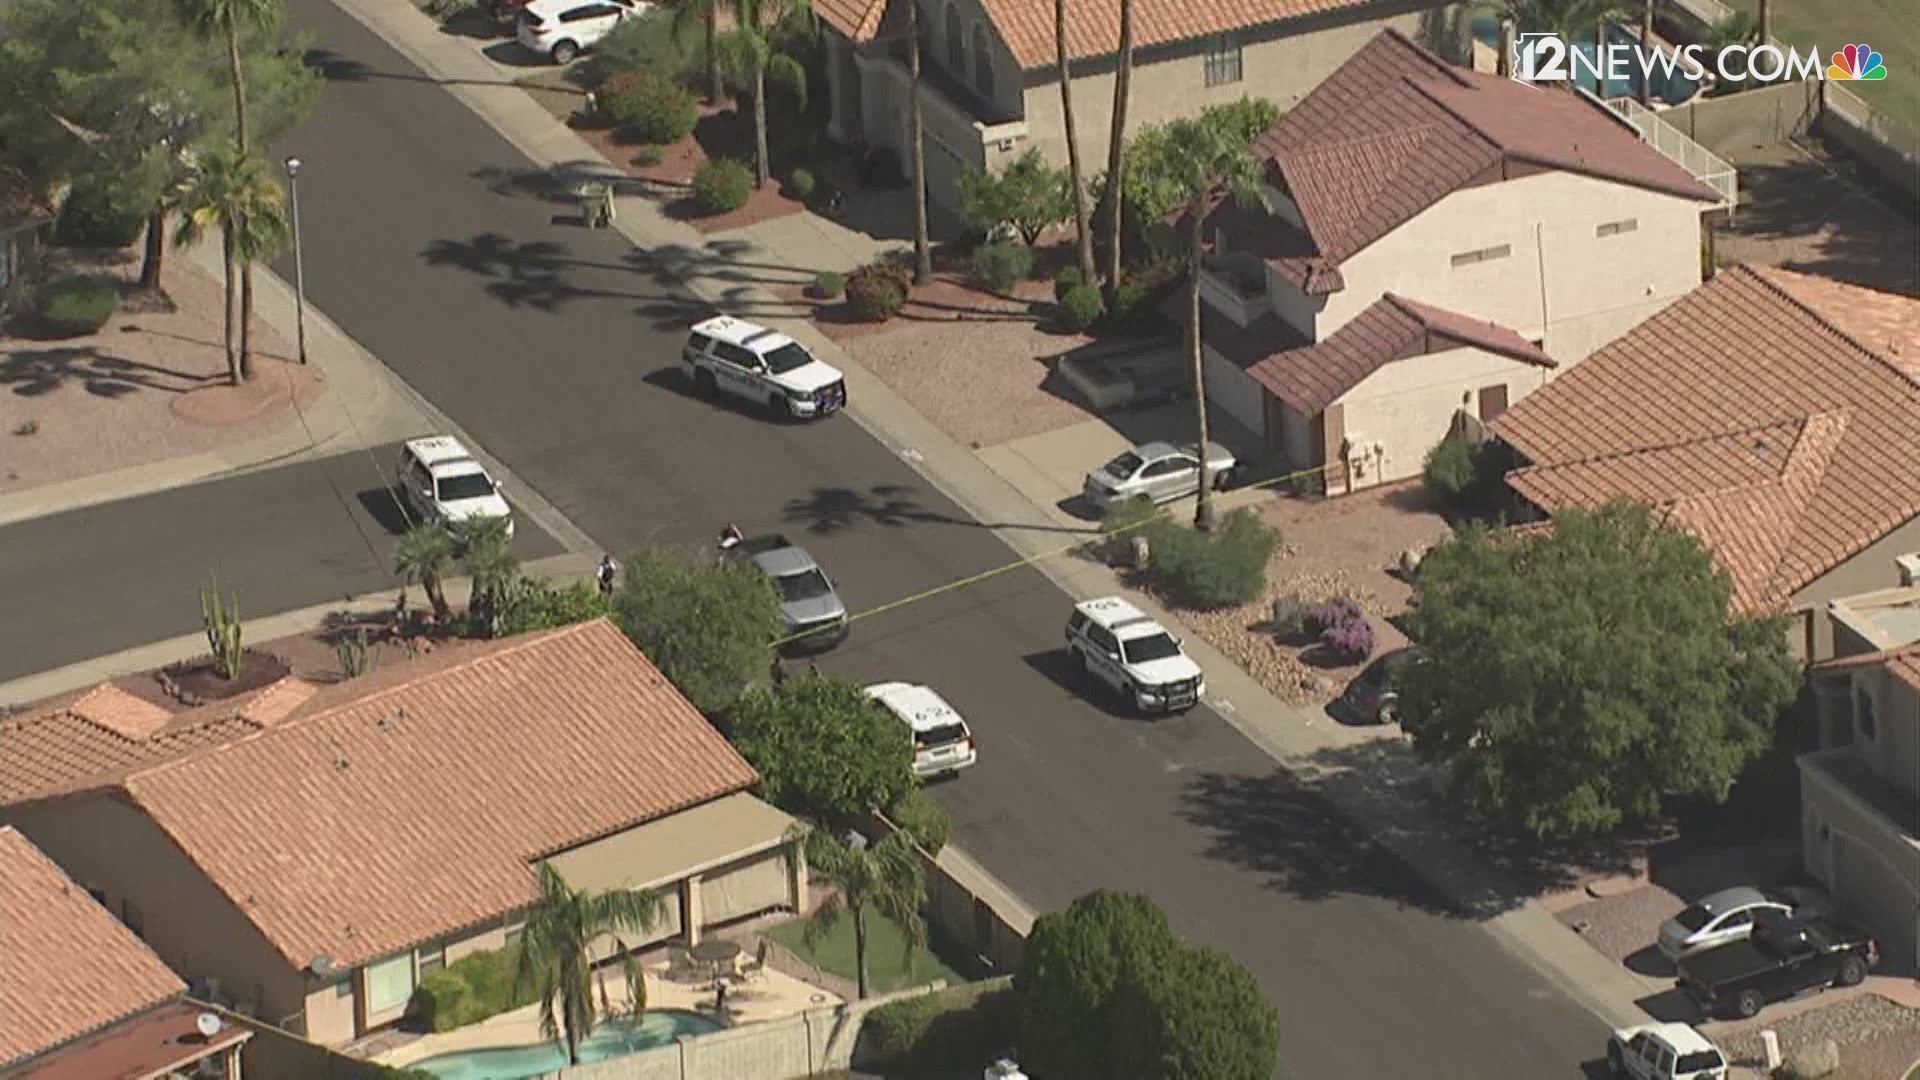 Sky12 shows the scene where a man was found shot and killed in Glendale.